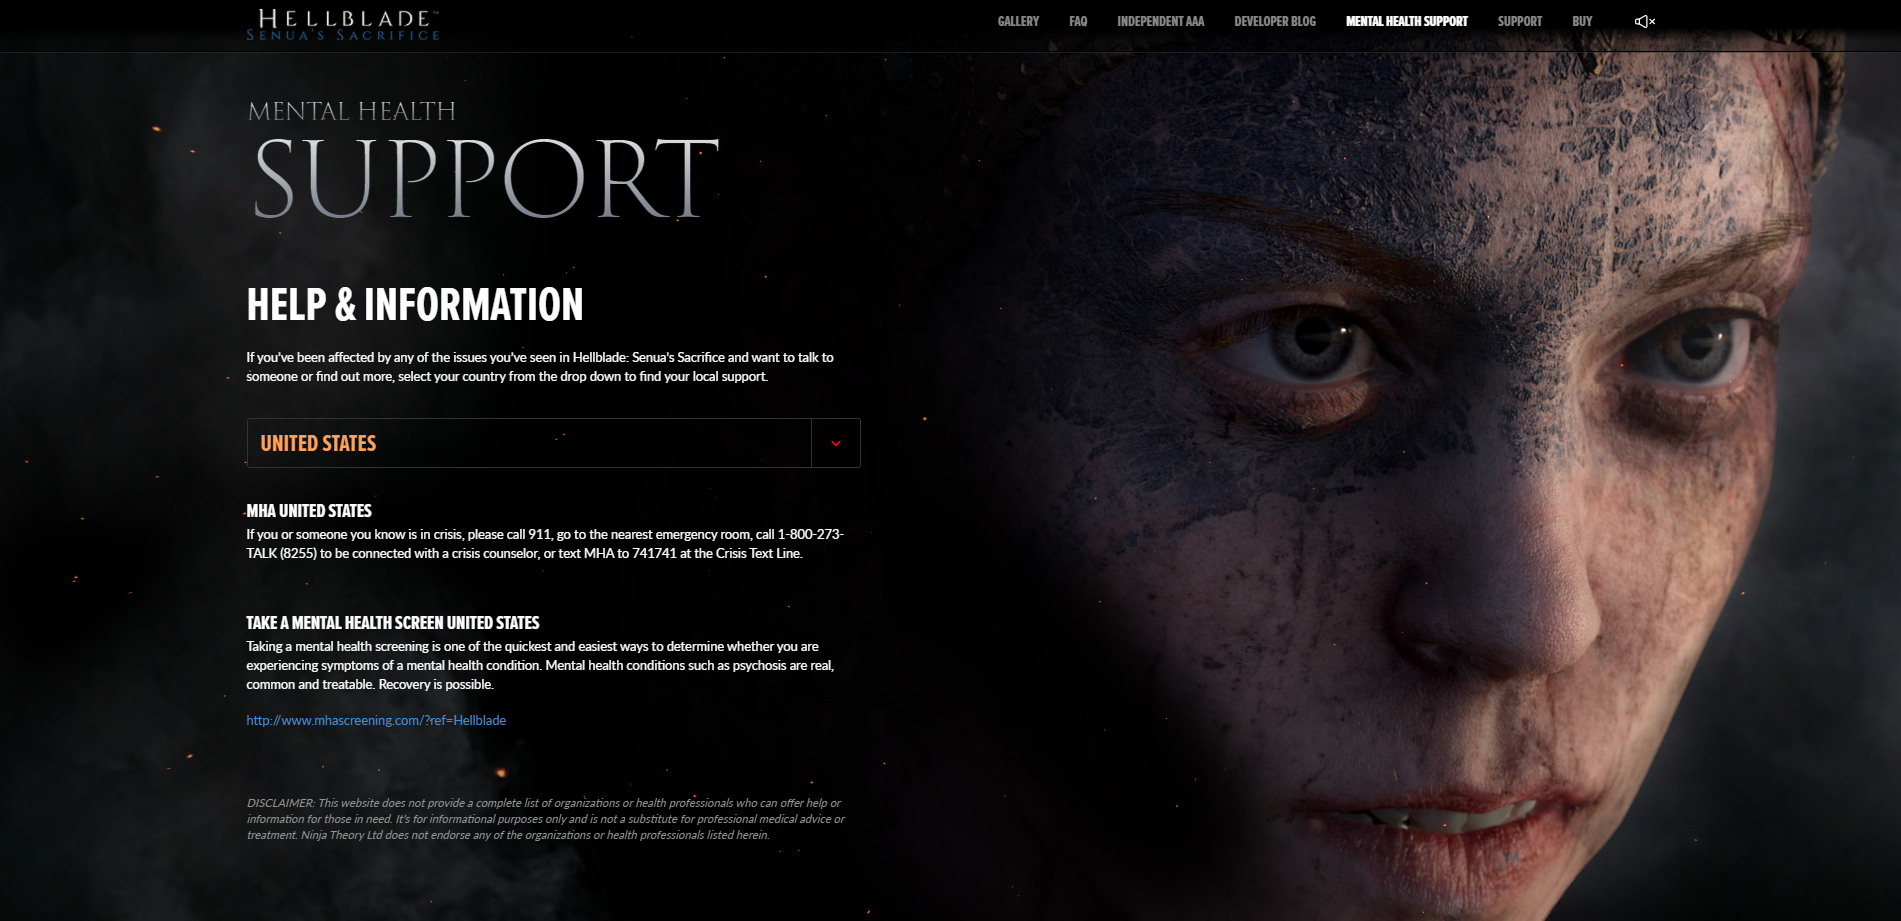 Hellblade Senua's Sacrifice Support page titled Help & Information with a drop down picker for country where United States is currently selected. Below the picker are two united states resources, MHA United States with contact numbers and "Take a mental health screen united states" with a link.